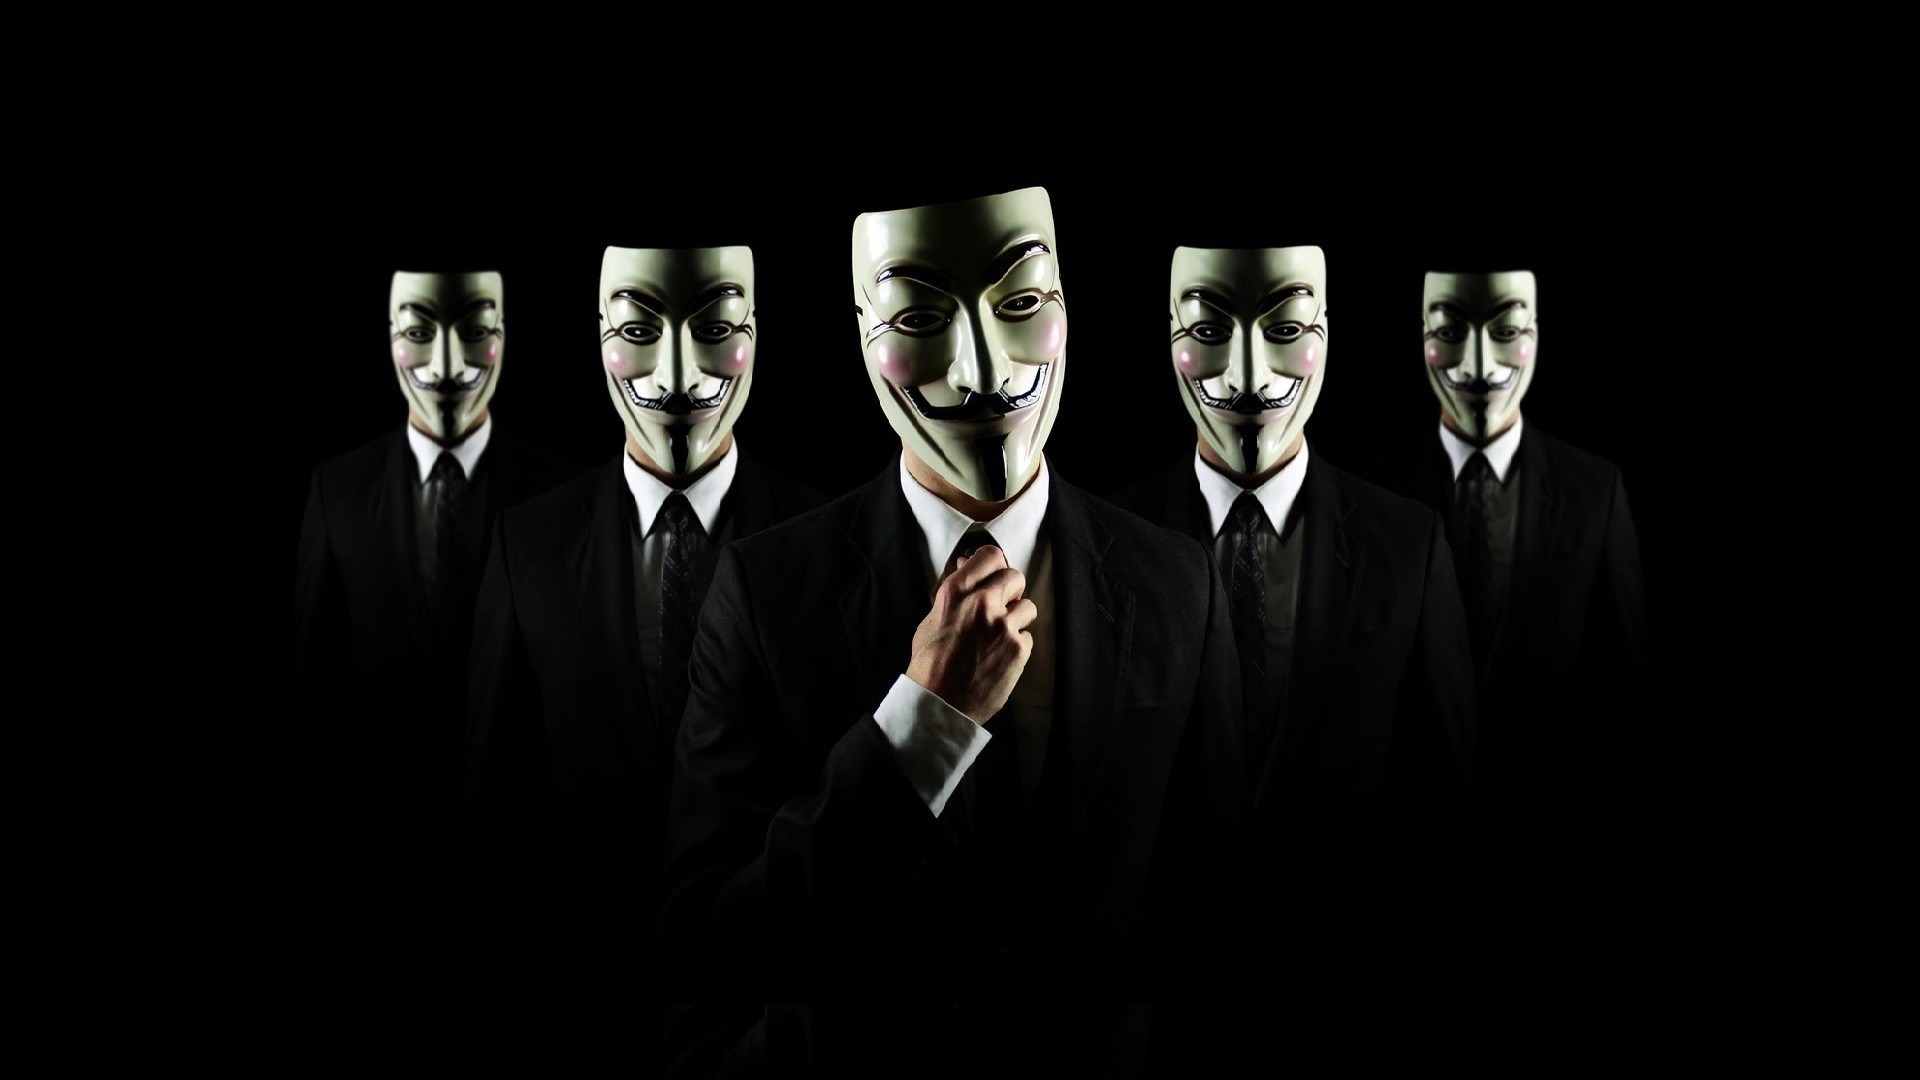 Wallpapers twilight anonymous many on the desktop